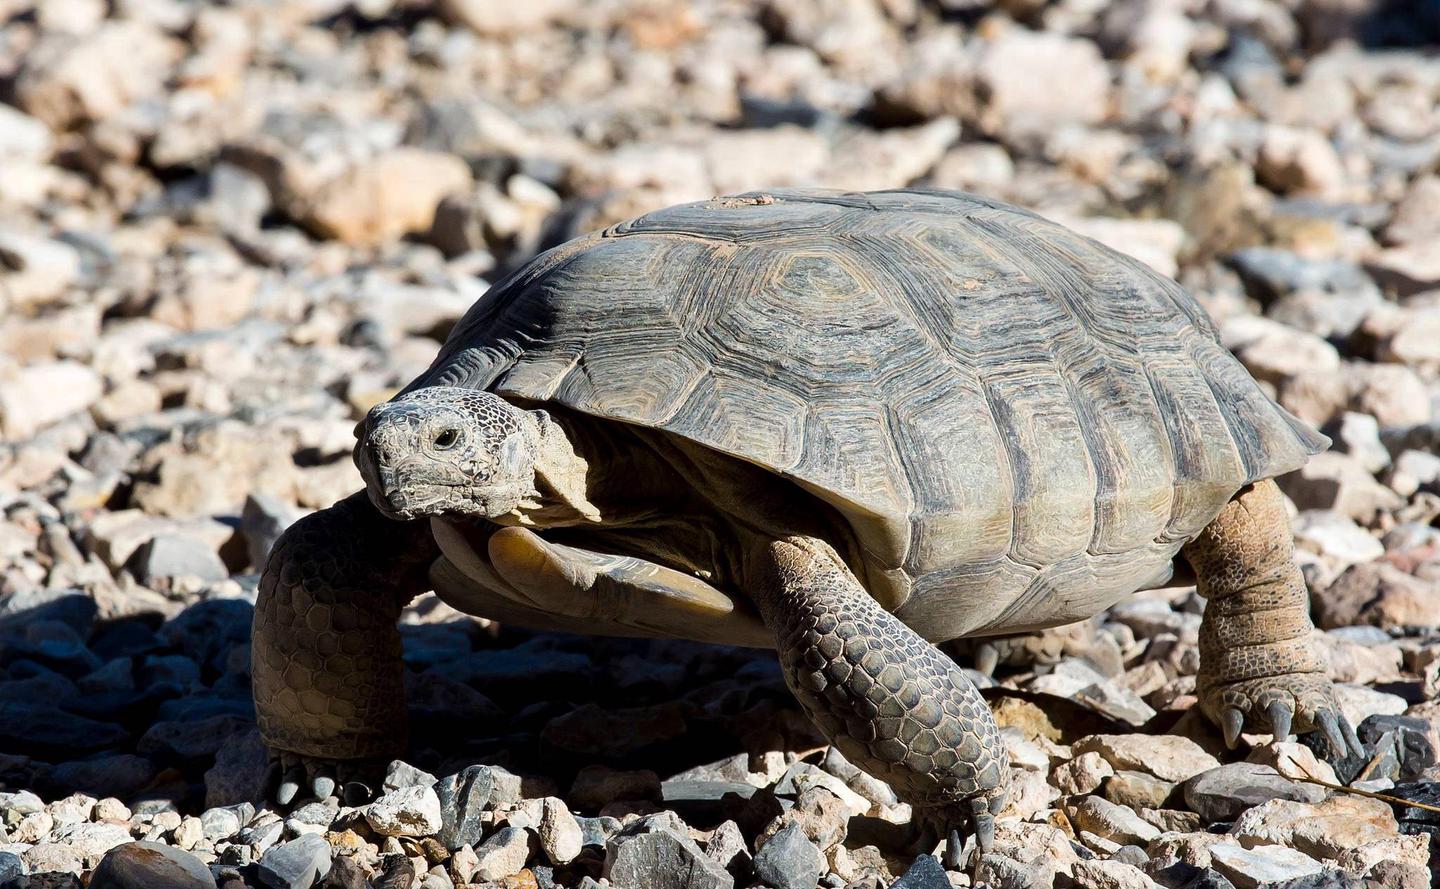 A close-up picture of a desert tortoise.